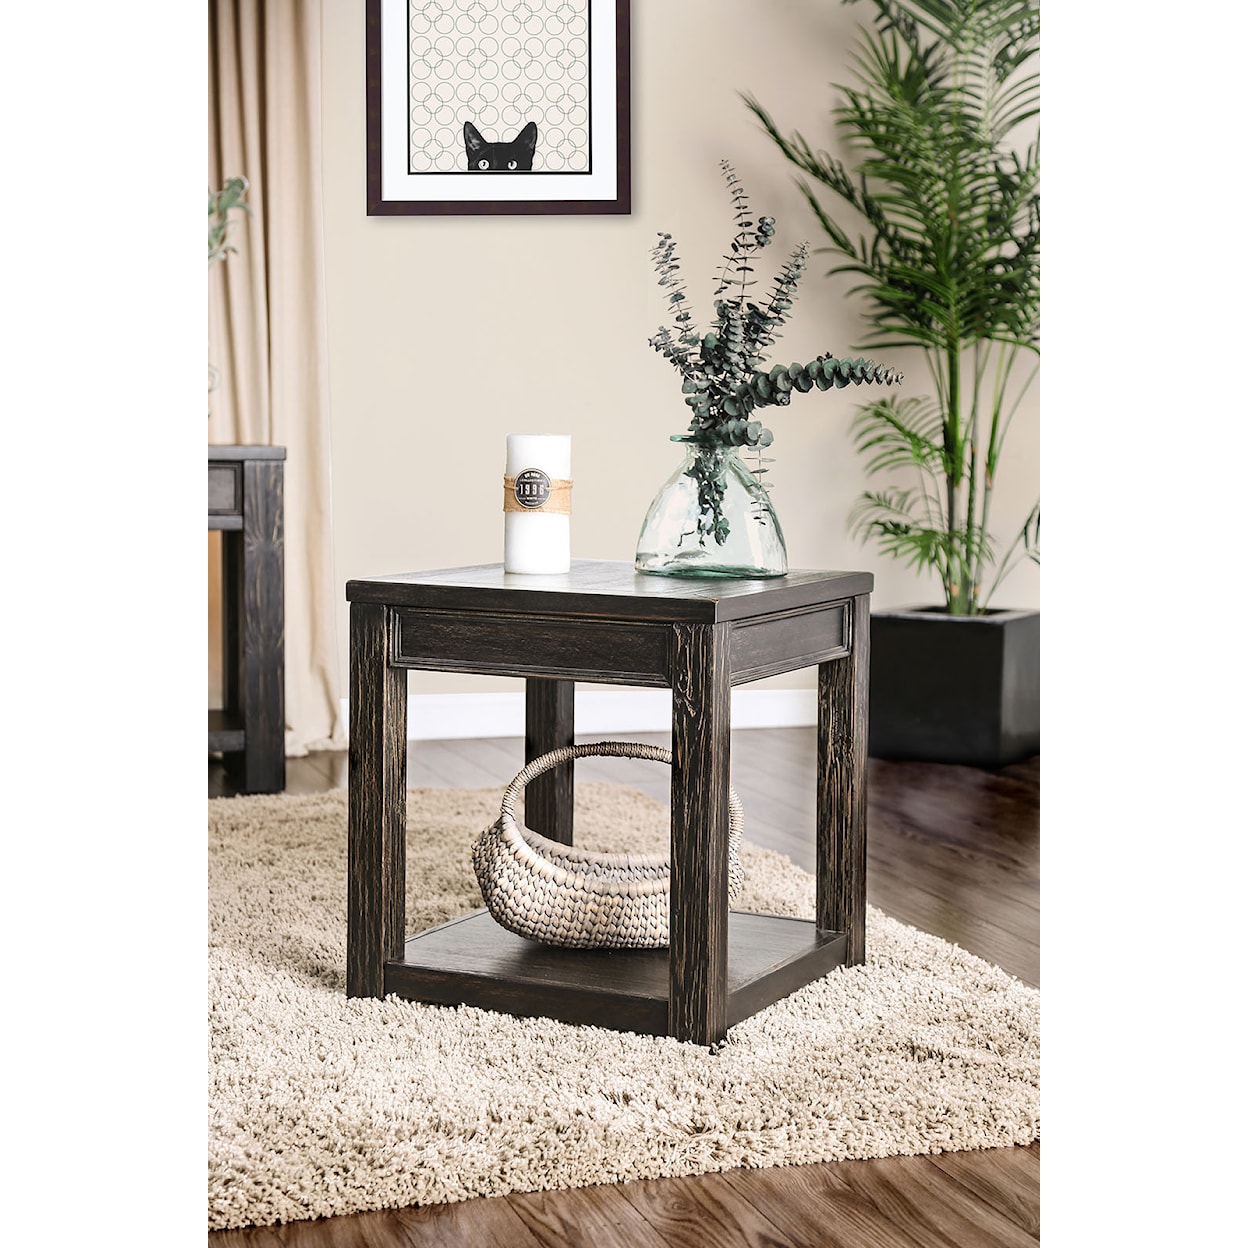 FUSA Meadow Square End Table